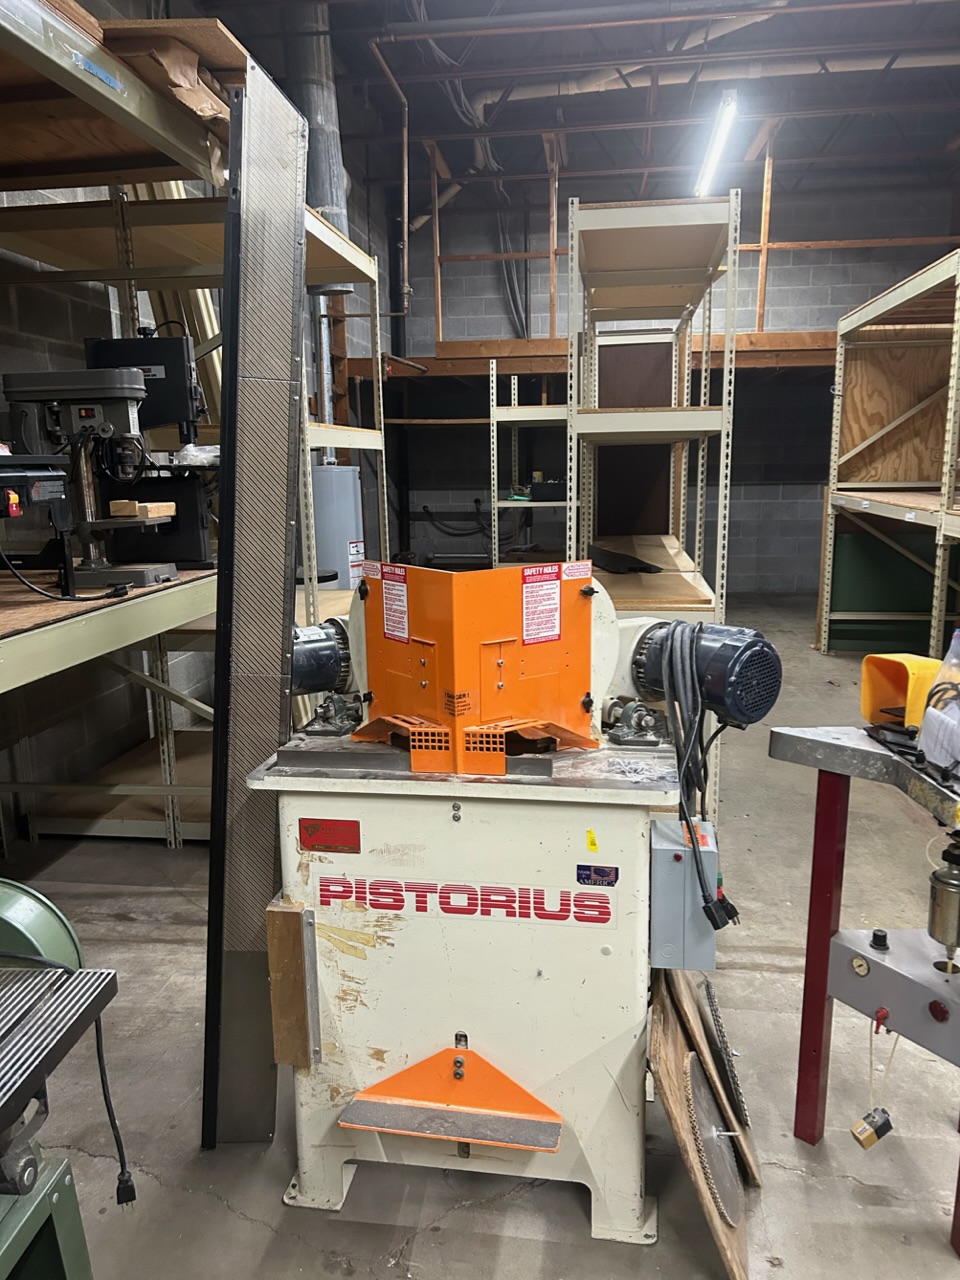 Equipment Lot: Wizard 8000 CMC – Computerized Mat Cutter & Pistorius EMN-12 Double Miter Saw (Used) Item # UE-091923B